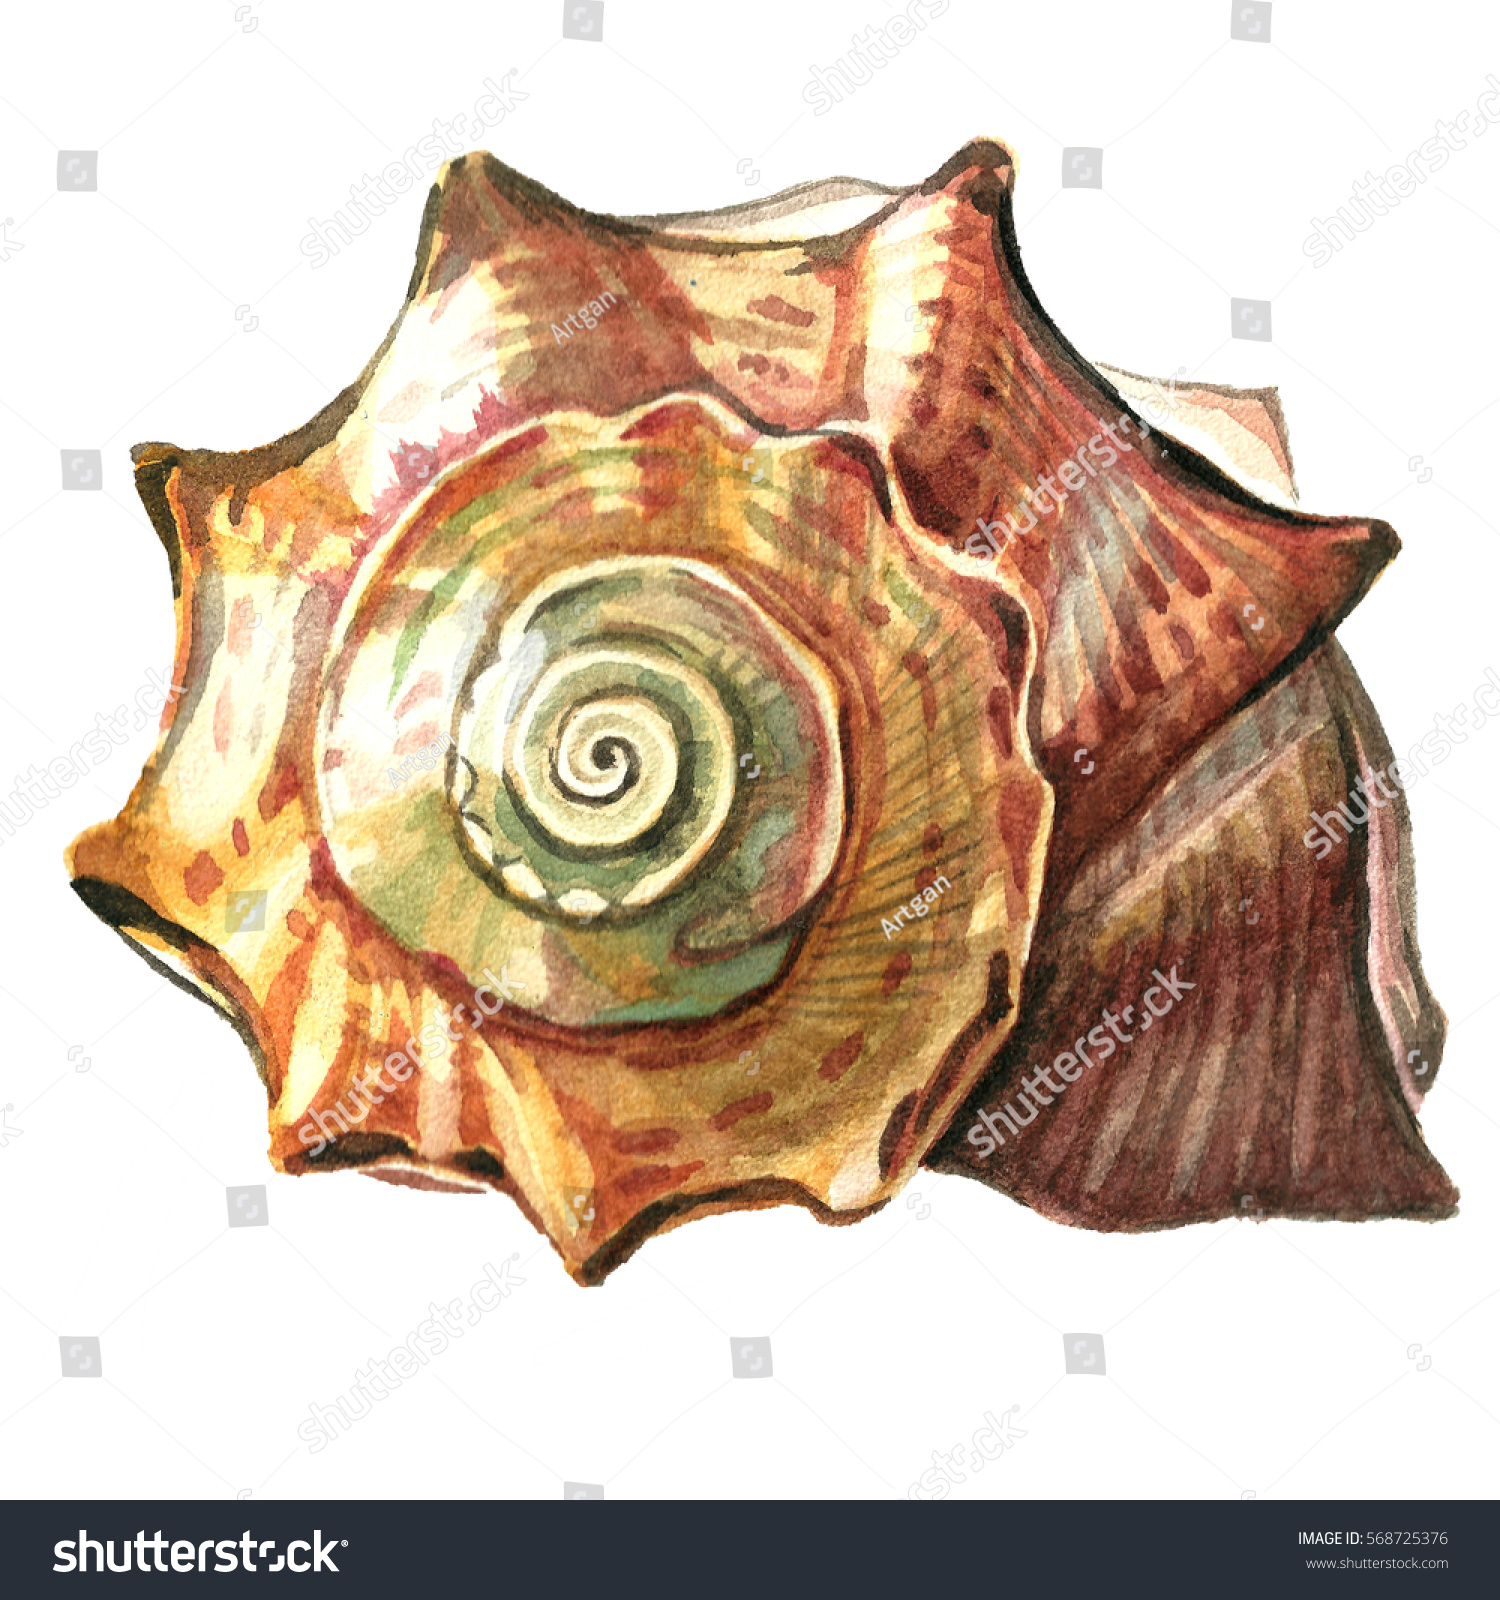 conch shell paintings